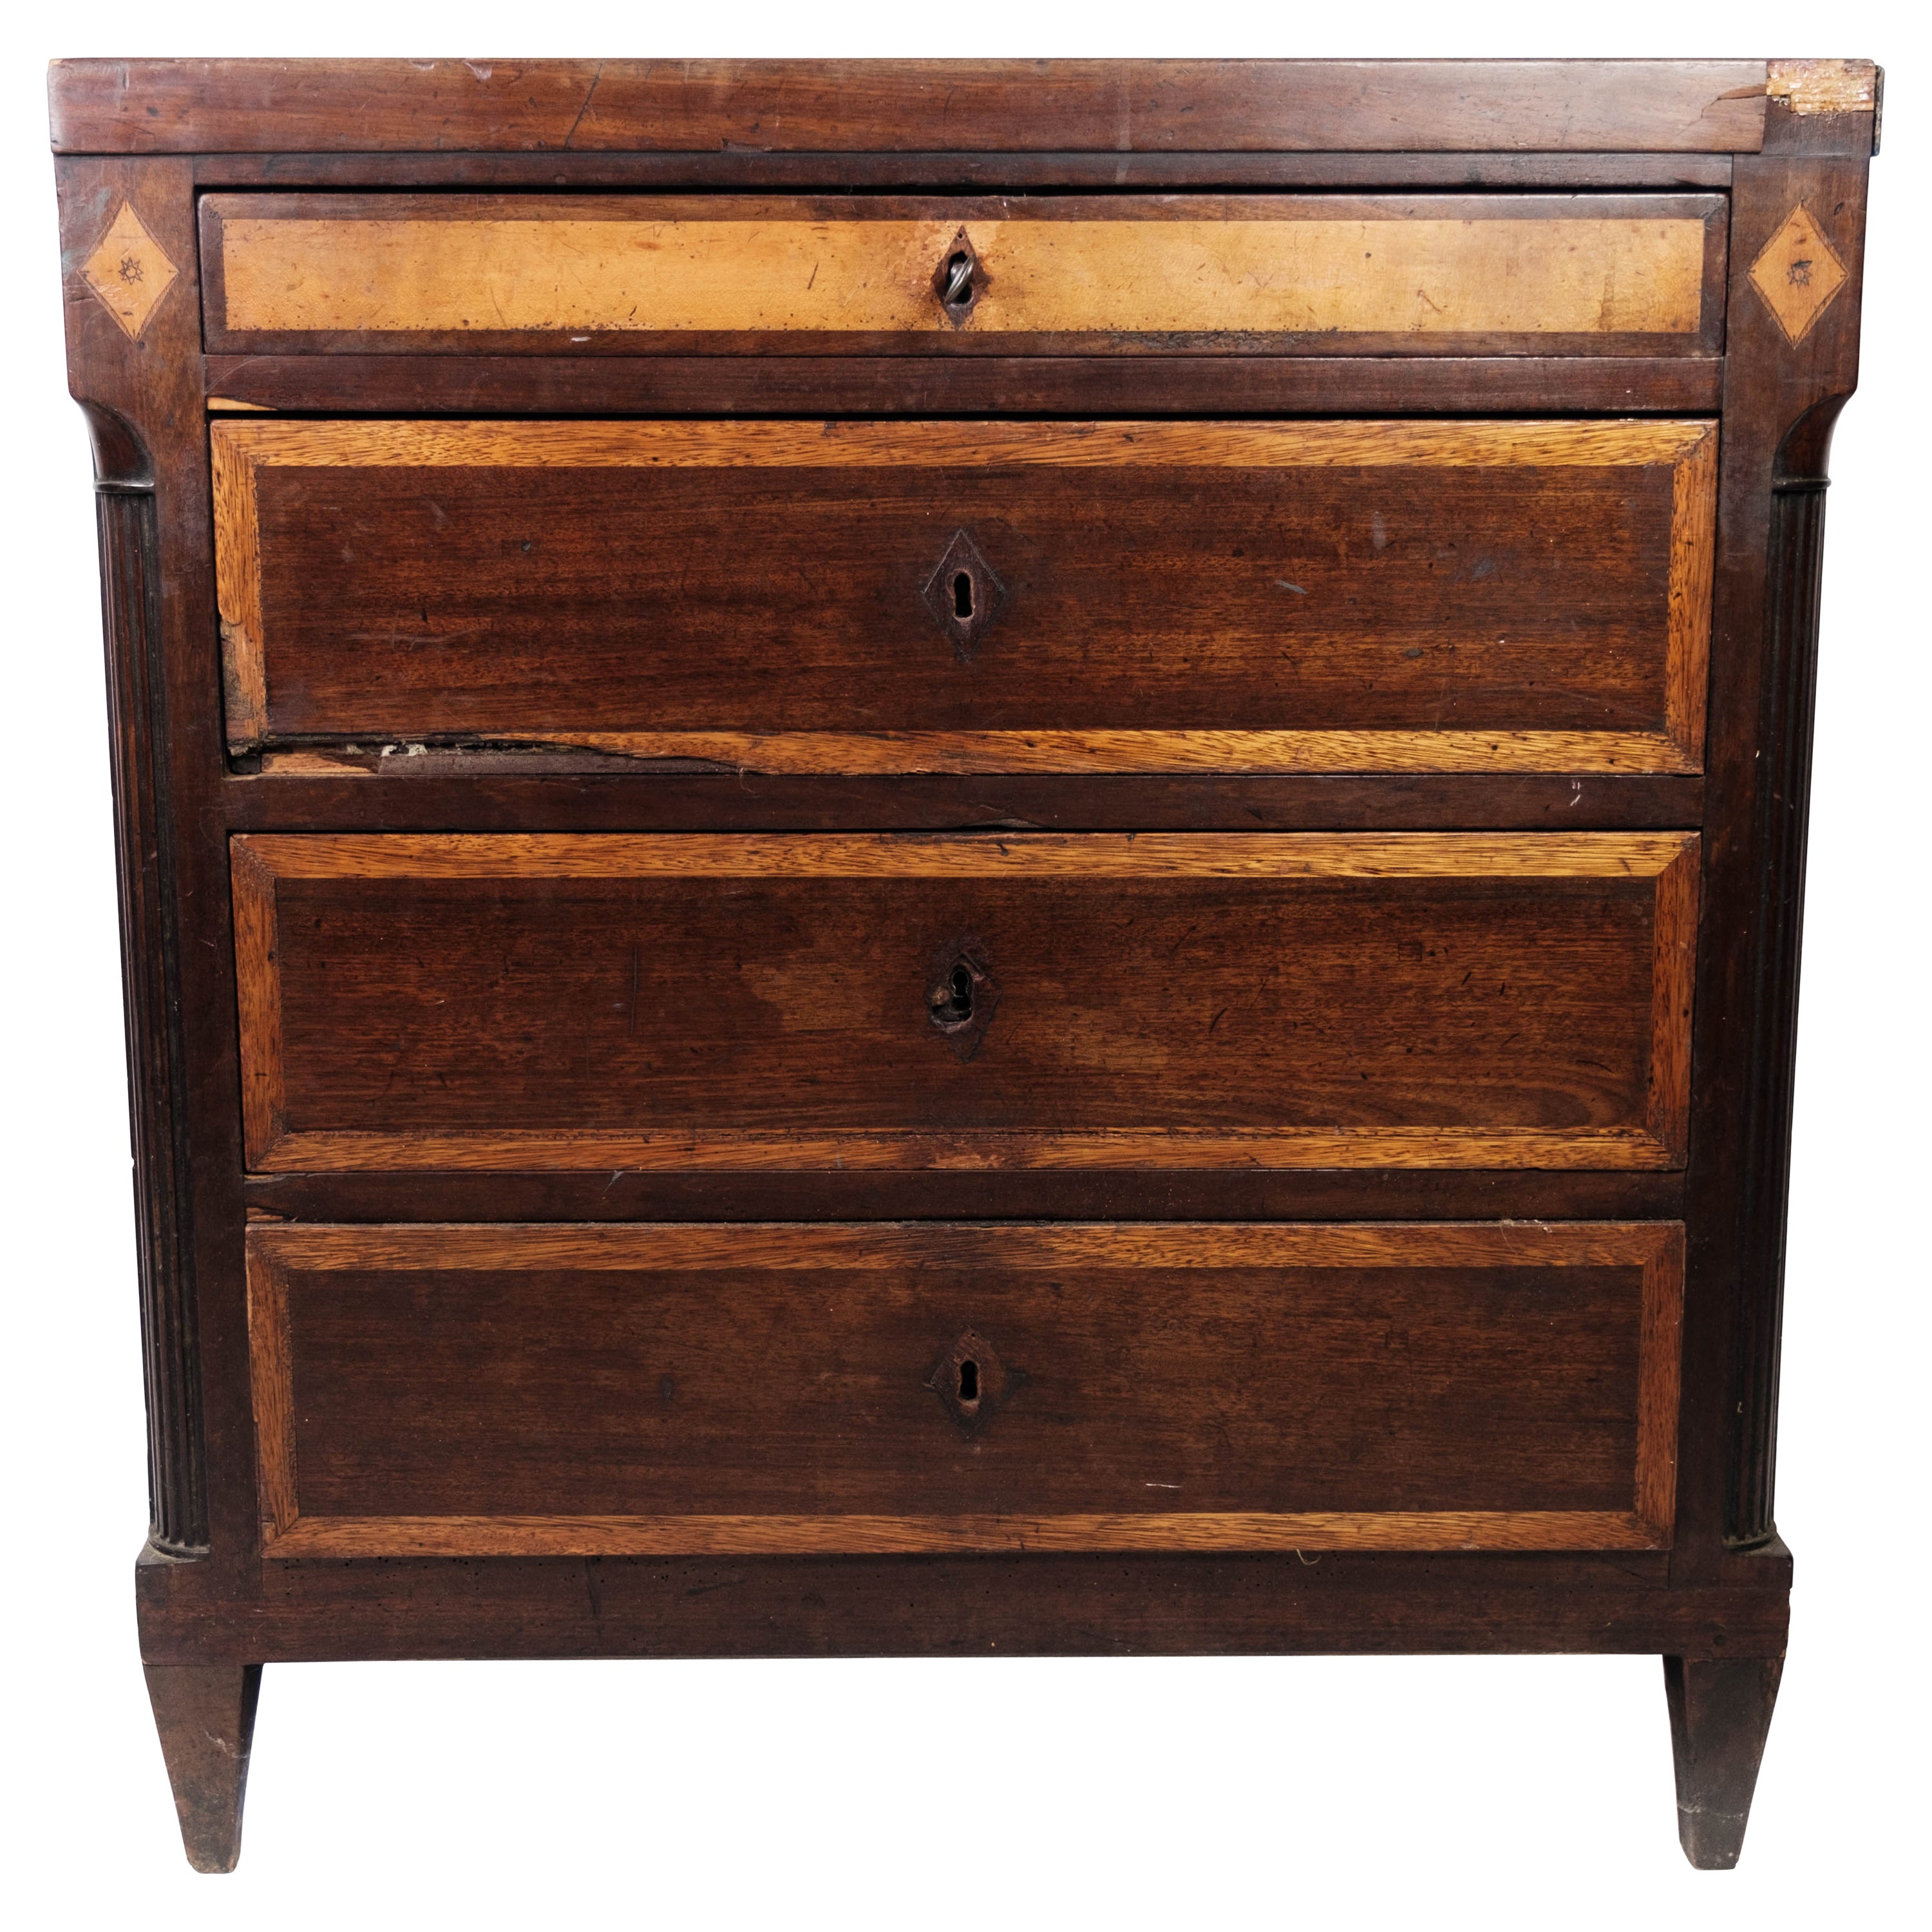 Louis Seize Chest of Drawers Made In Mahogany With Inlaid Wood From 1790s For Sale